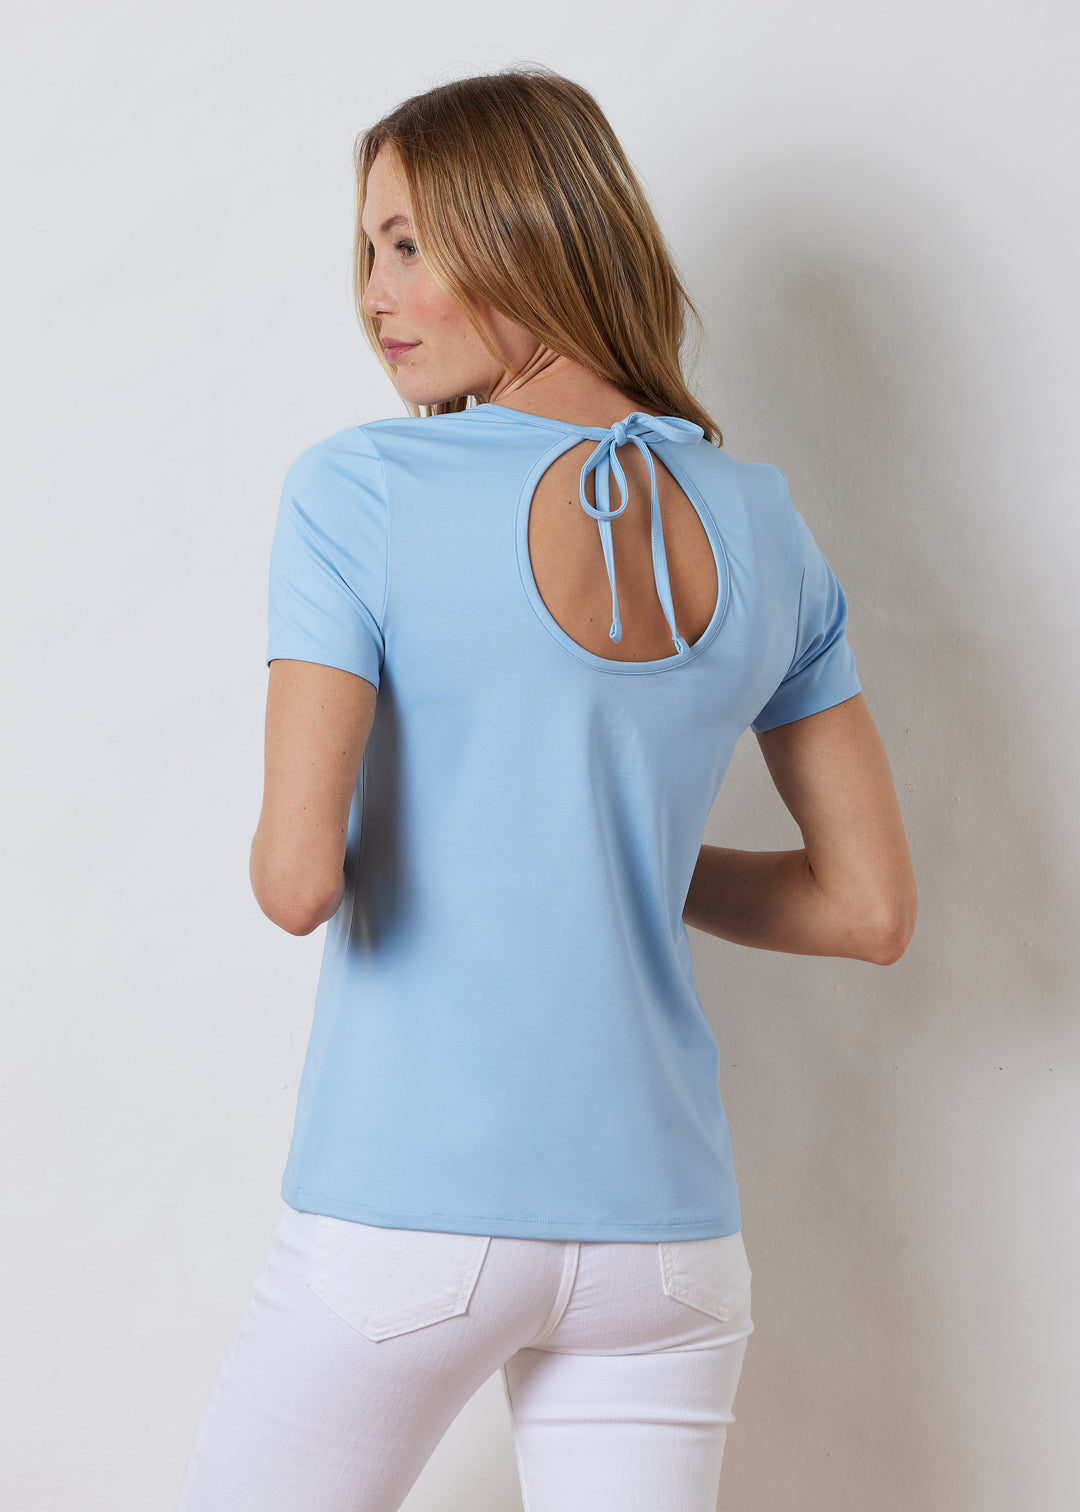 Bali Top in Luxe Stretch (Ice Blue)